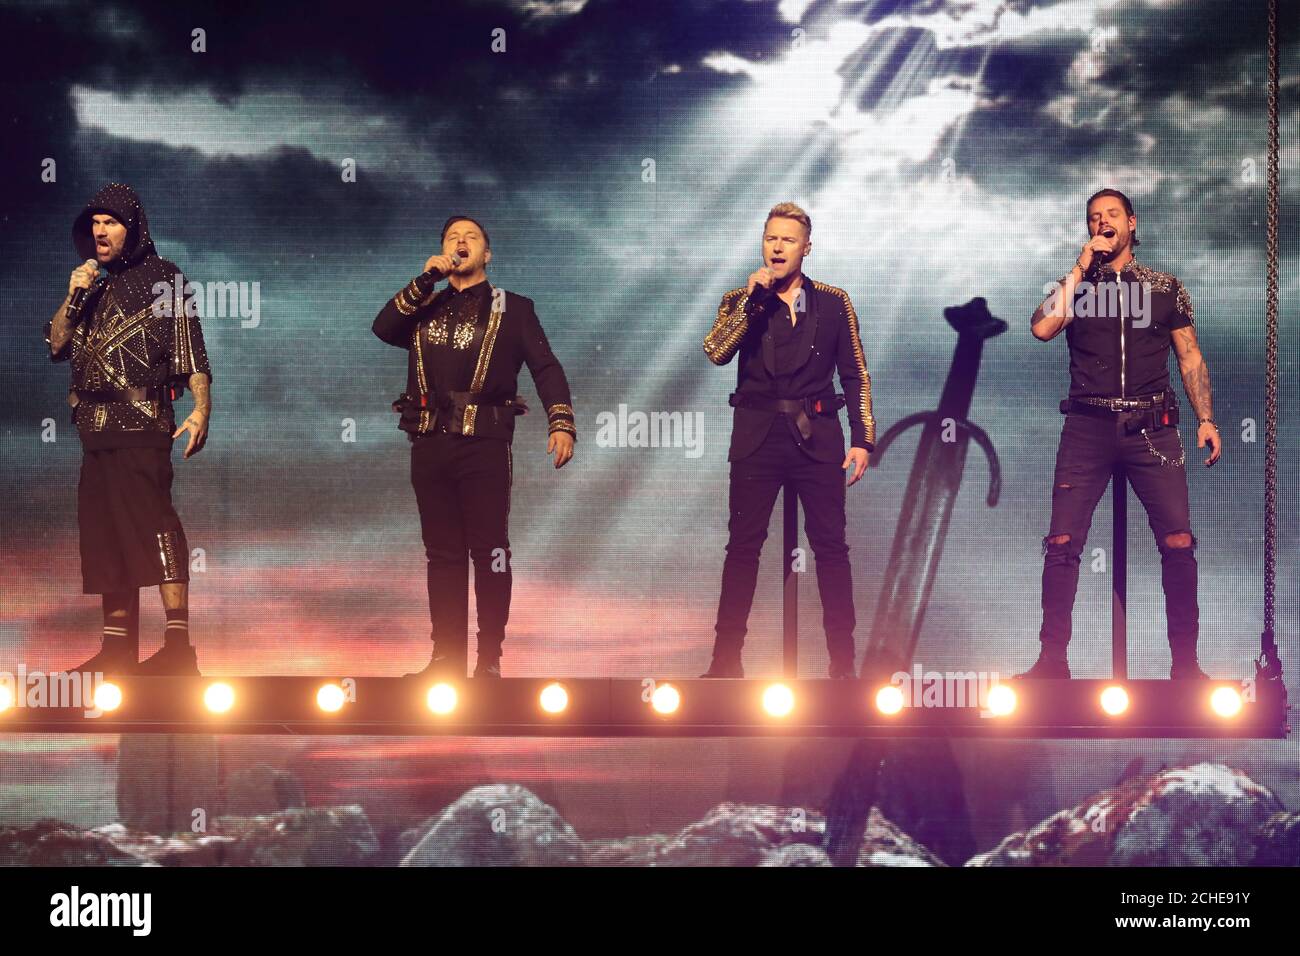 EDITORIAL USE ONLY (left to right) Shane Lynch, Mikey Graham, Ronan Keating and Keith Duffy of Boyzone on stage at the SSE Arena, Belfast, as part of the band's Thank You & Goodnight farewell tour. Stock Photo